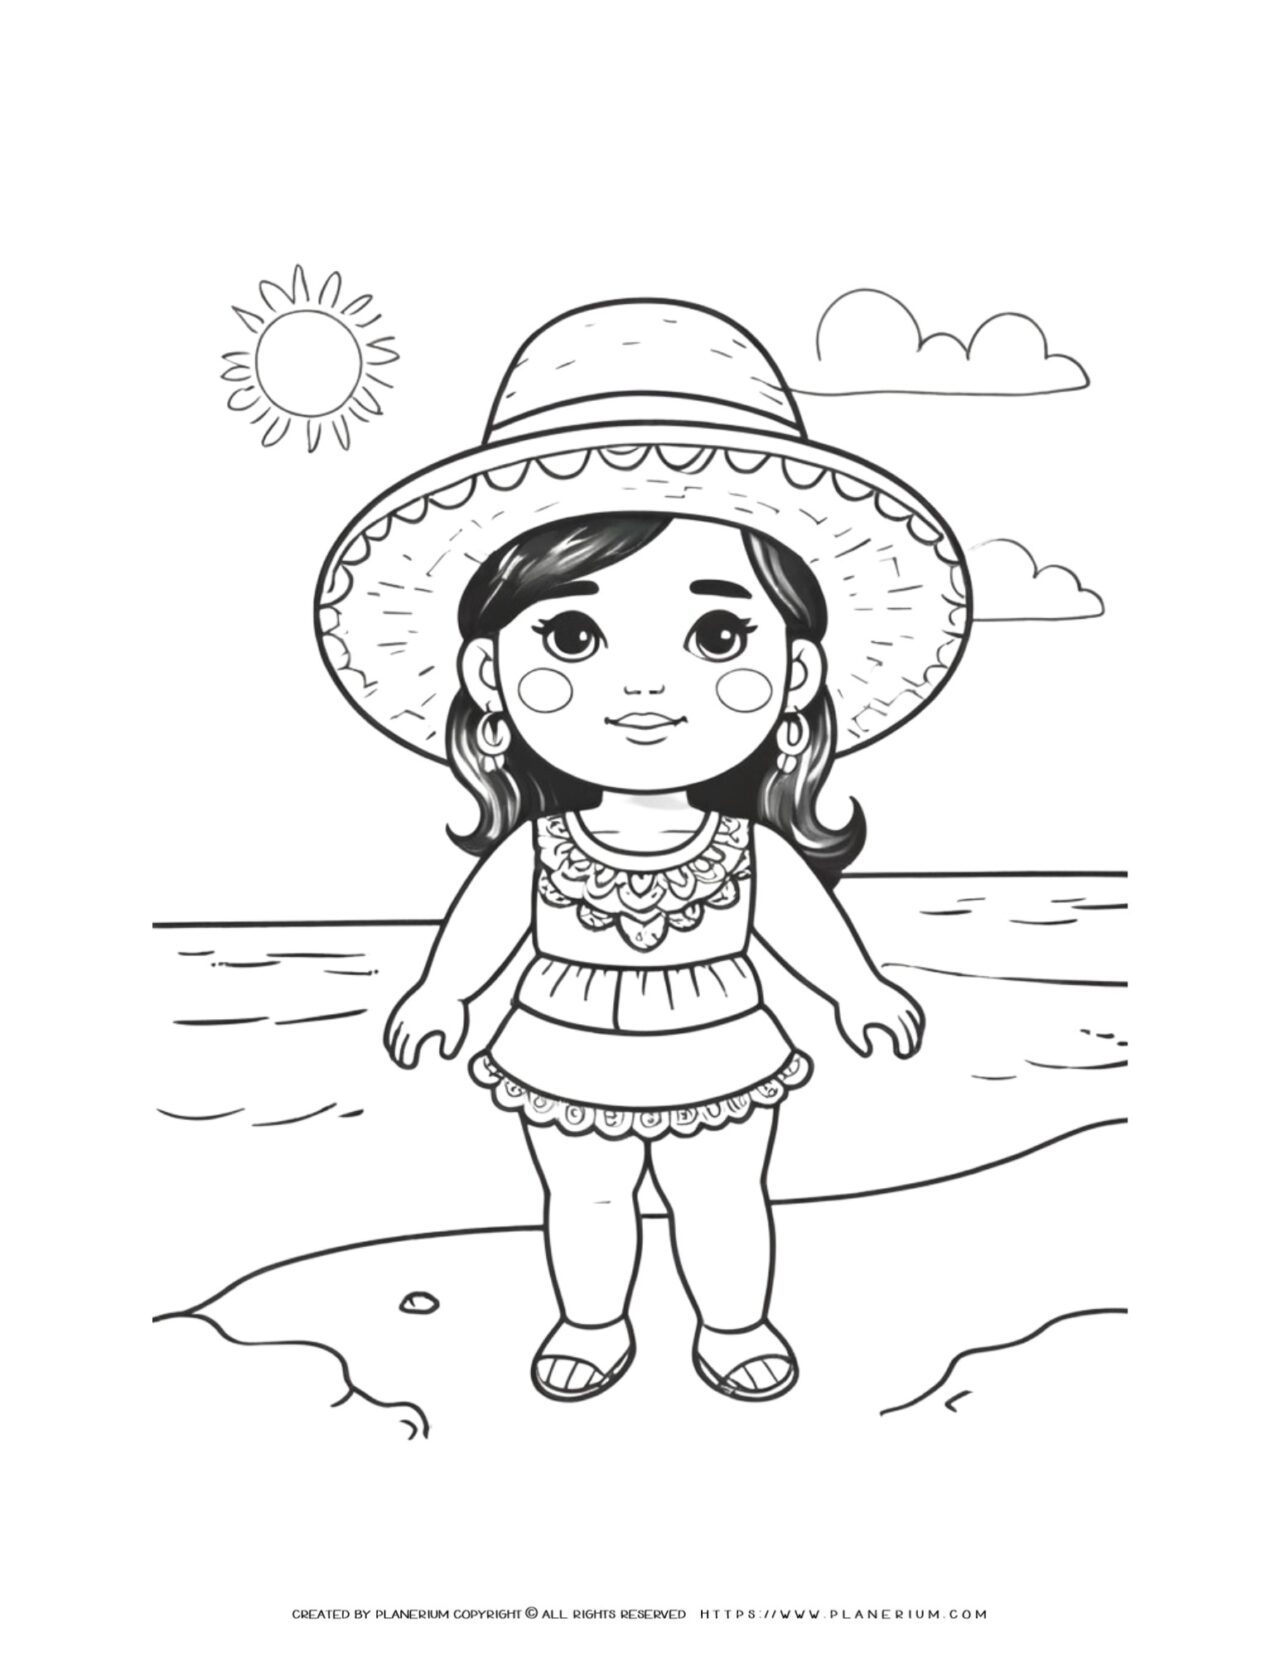 mexican-girl-with-summer-dress-sombrero-hat-sandals-standing-on-the-beach-coloring-page-for-kids